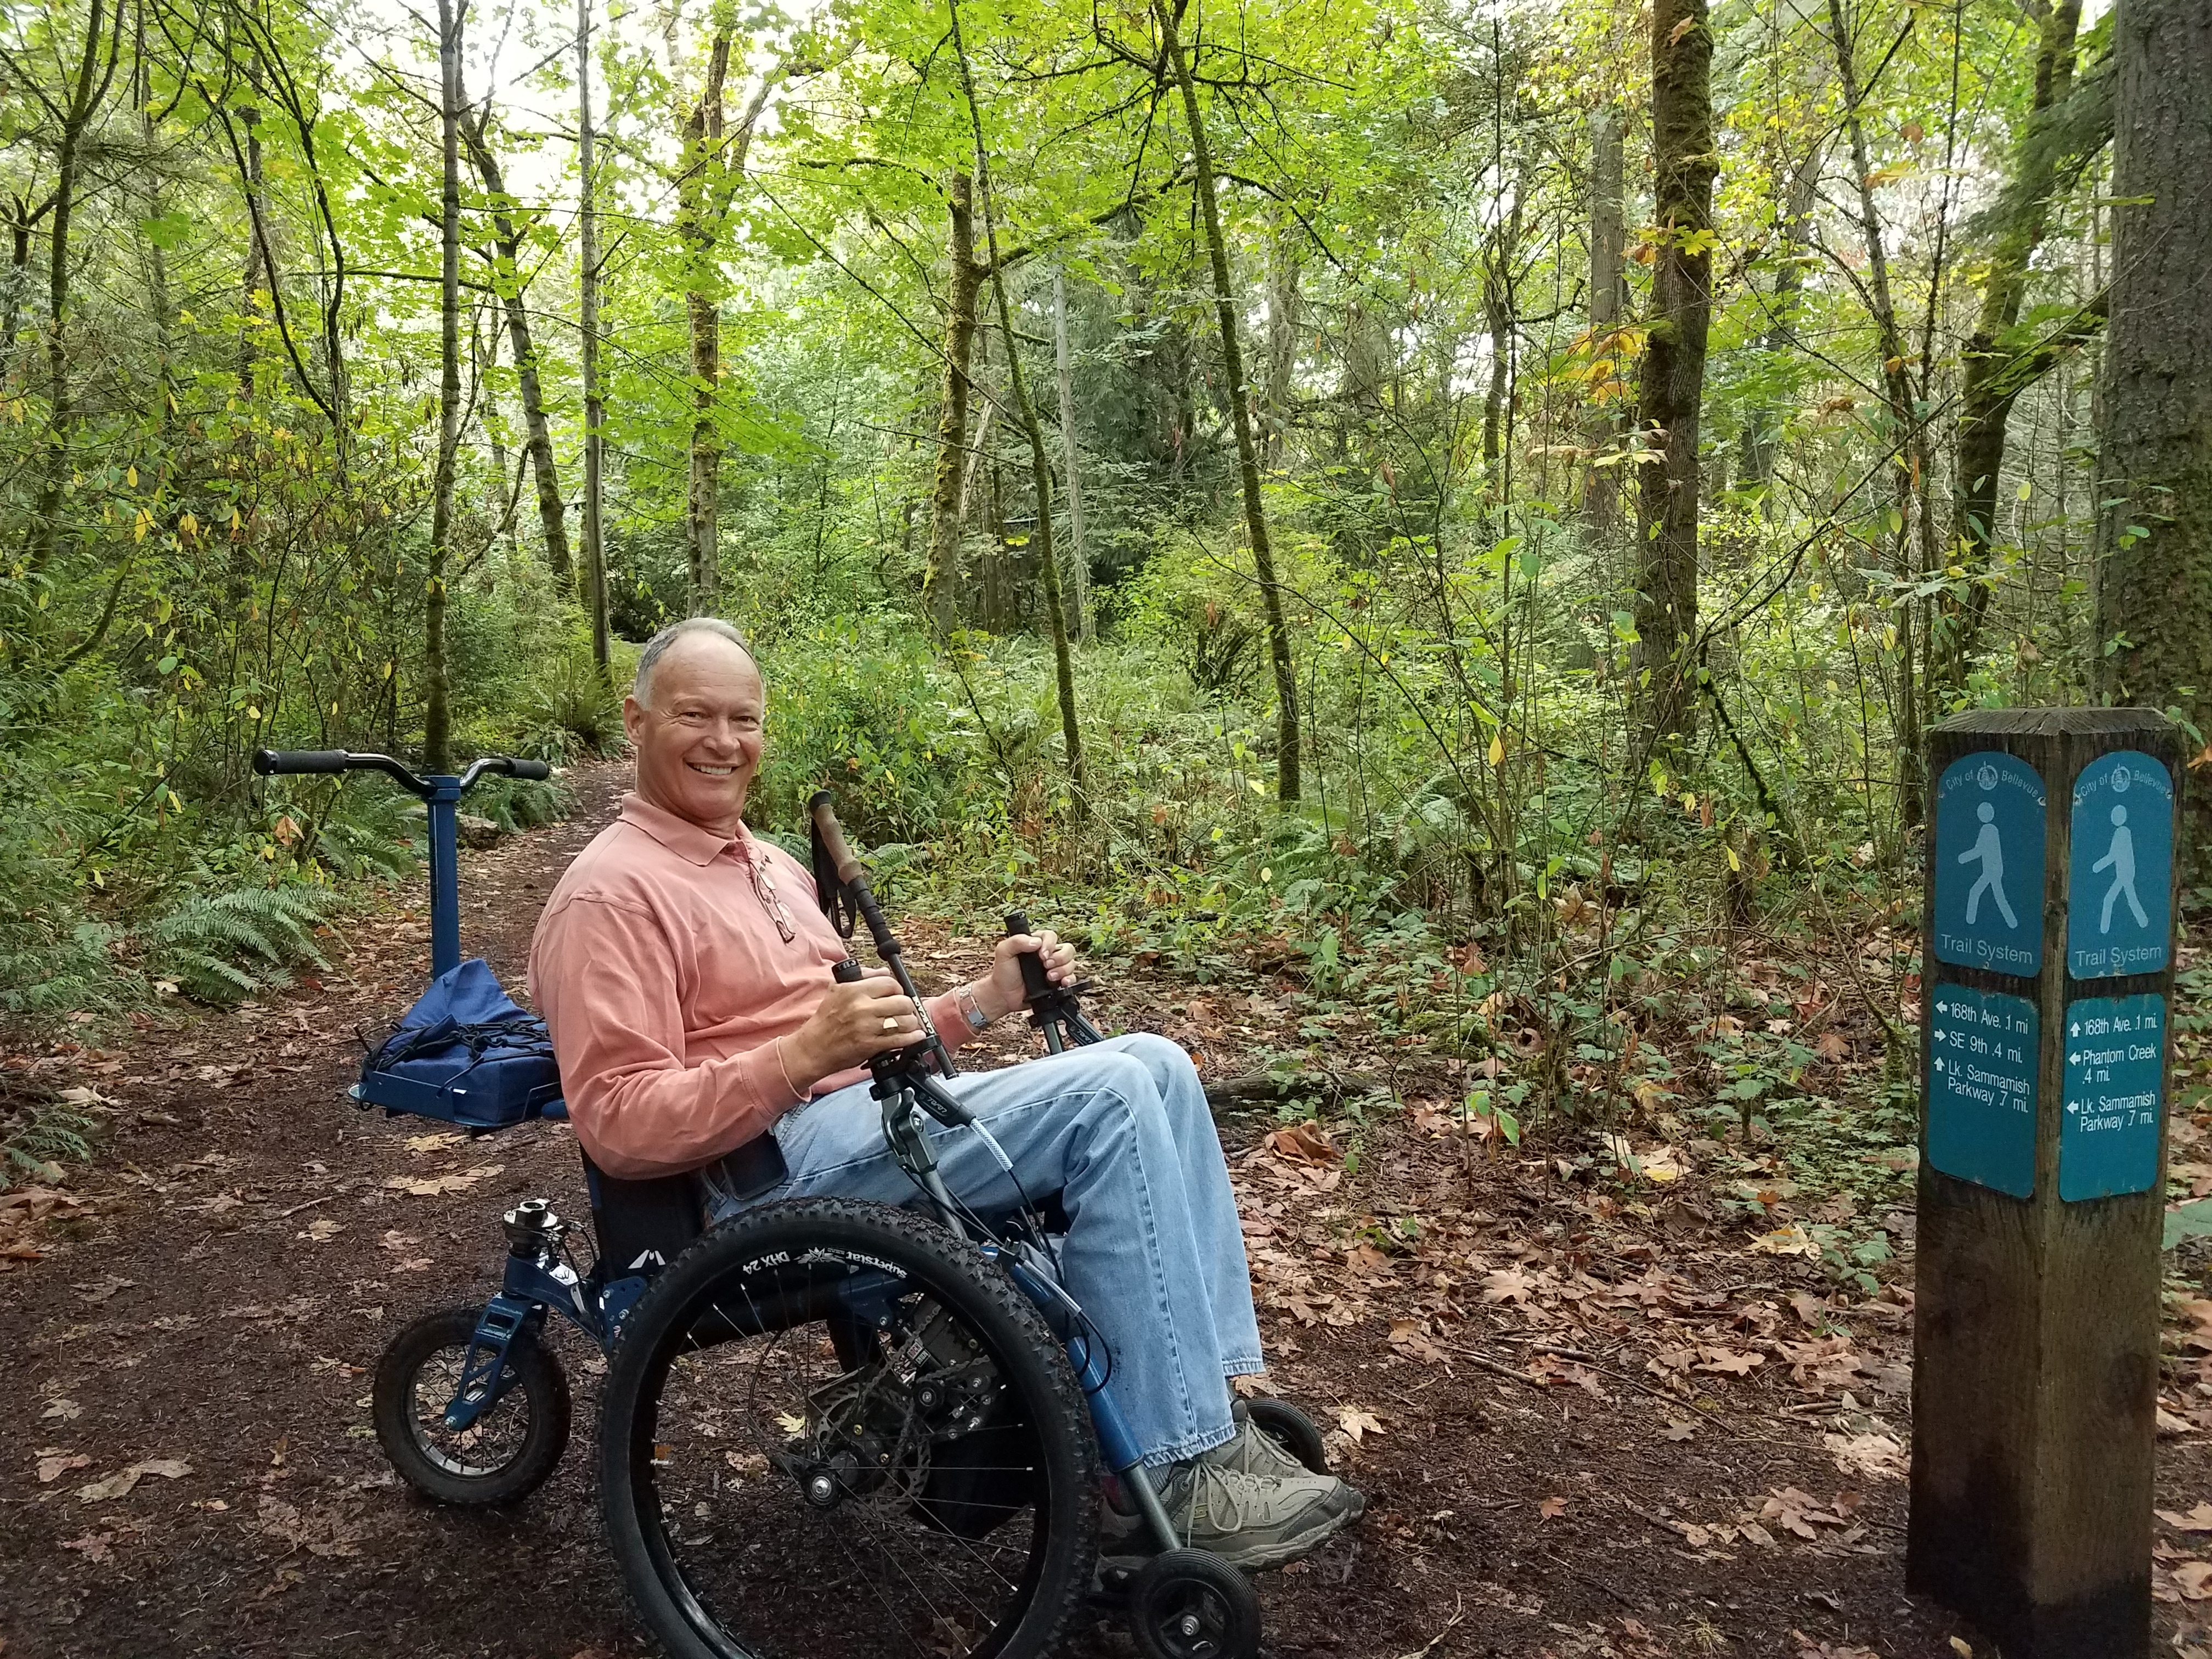 Travel anywhere with the Mountain Trike all terrain wheelchair - planes, trains, buses and boats!